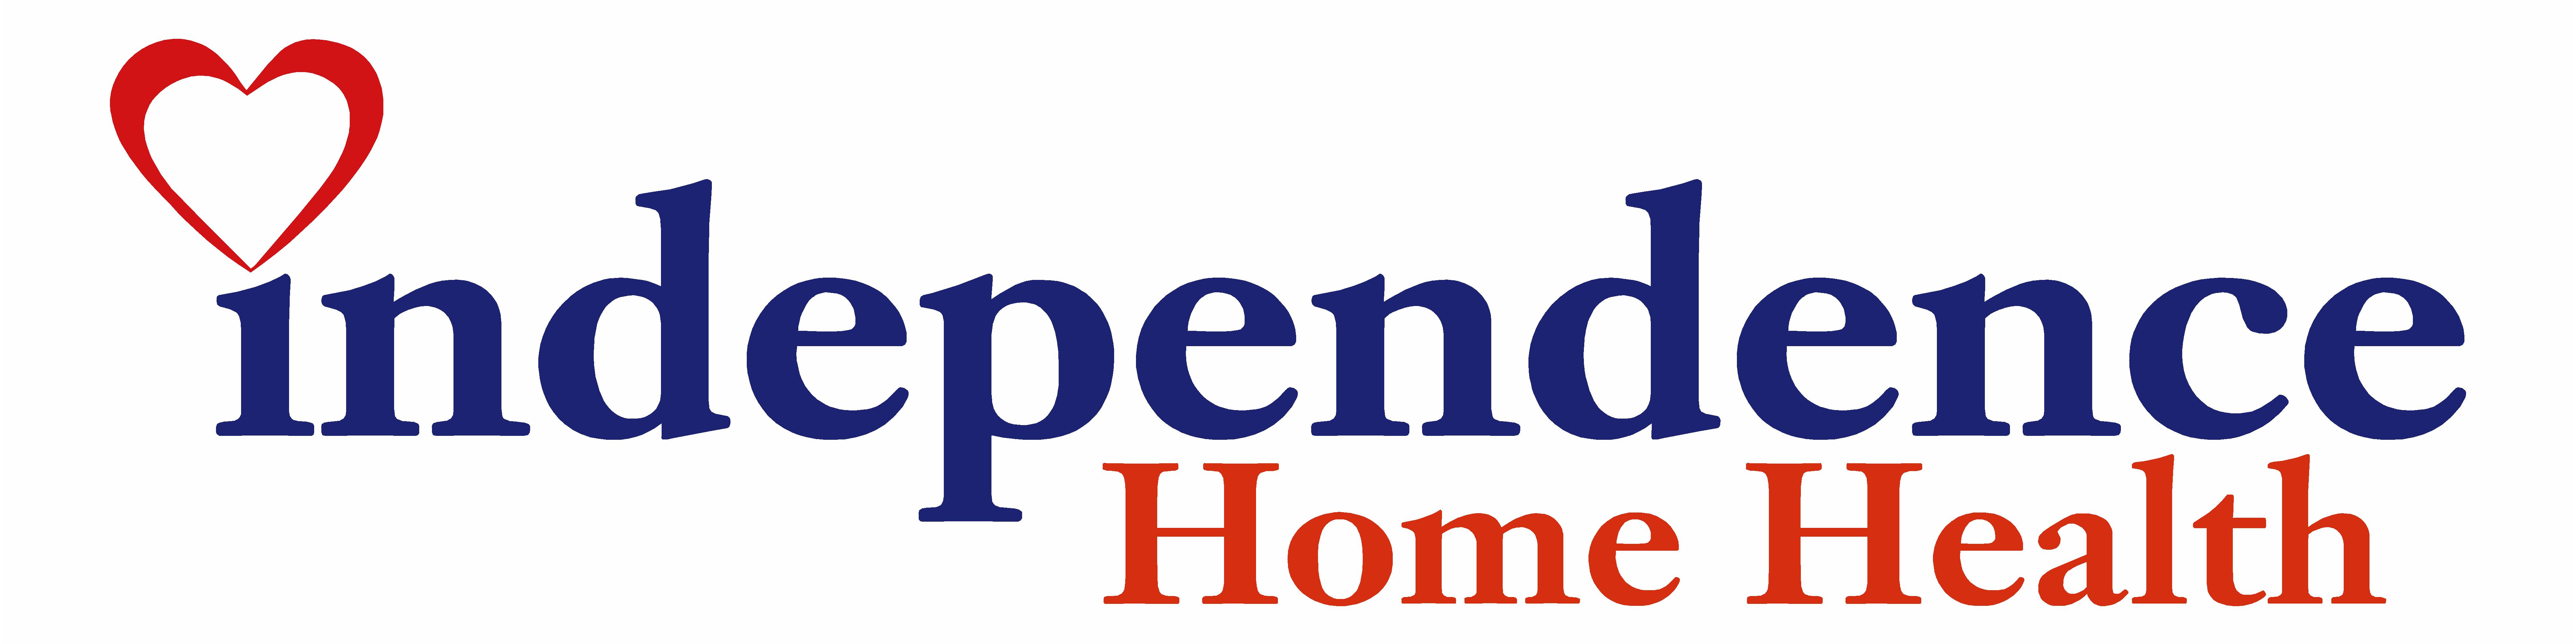 Independence Home Health at Cape Coral, FL